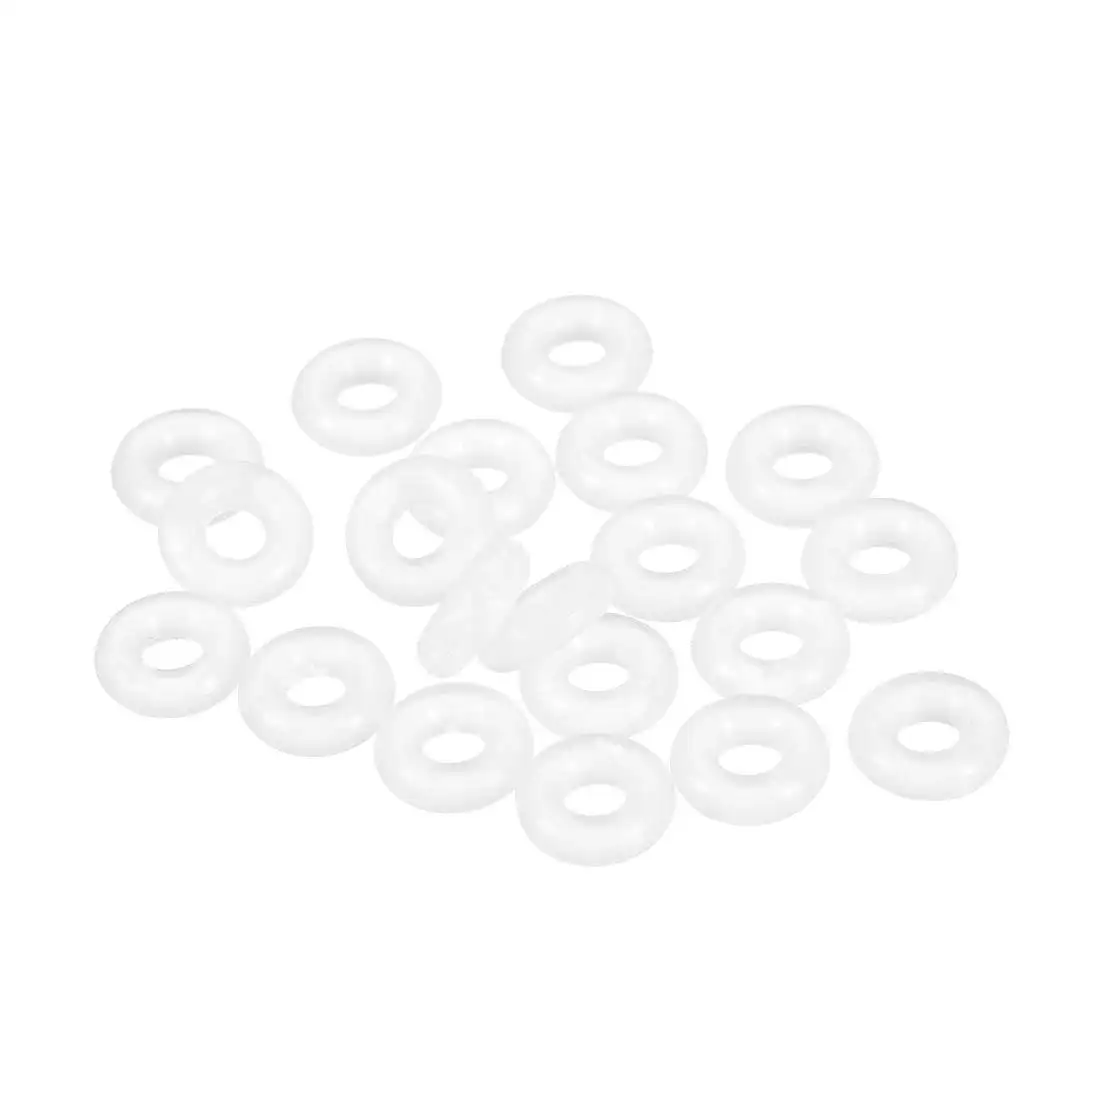 Silicone O Ring 10mm OD 4mm ID 3mm Width VMQ Seal Rings Gasket White Pack of 20